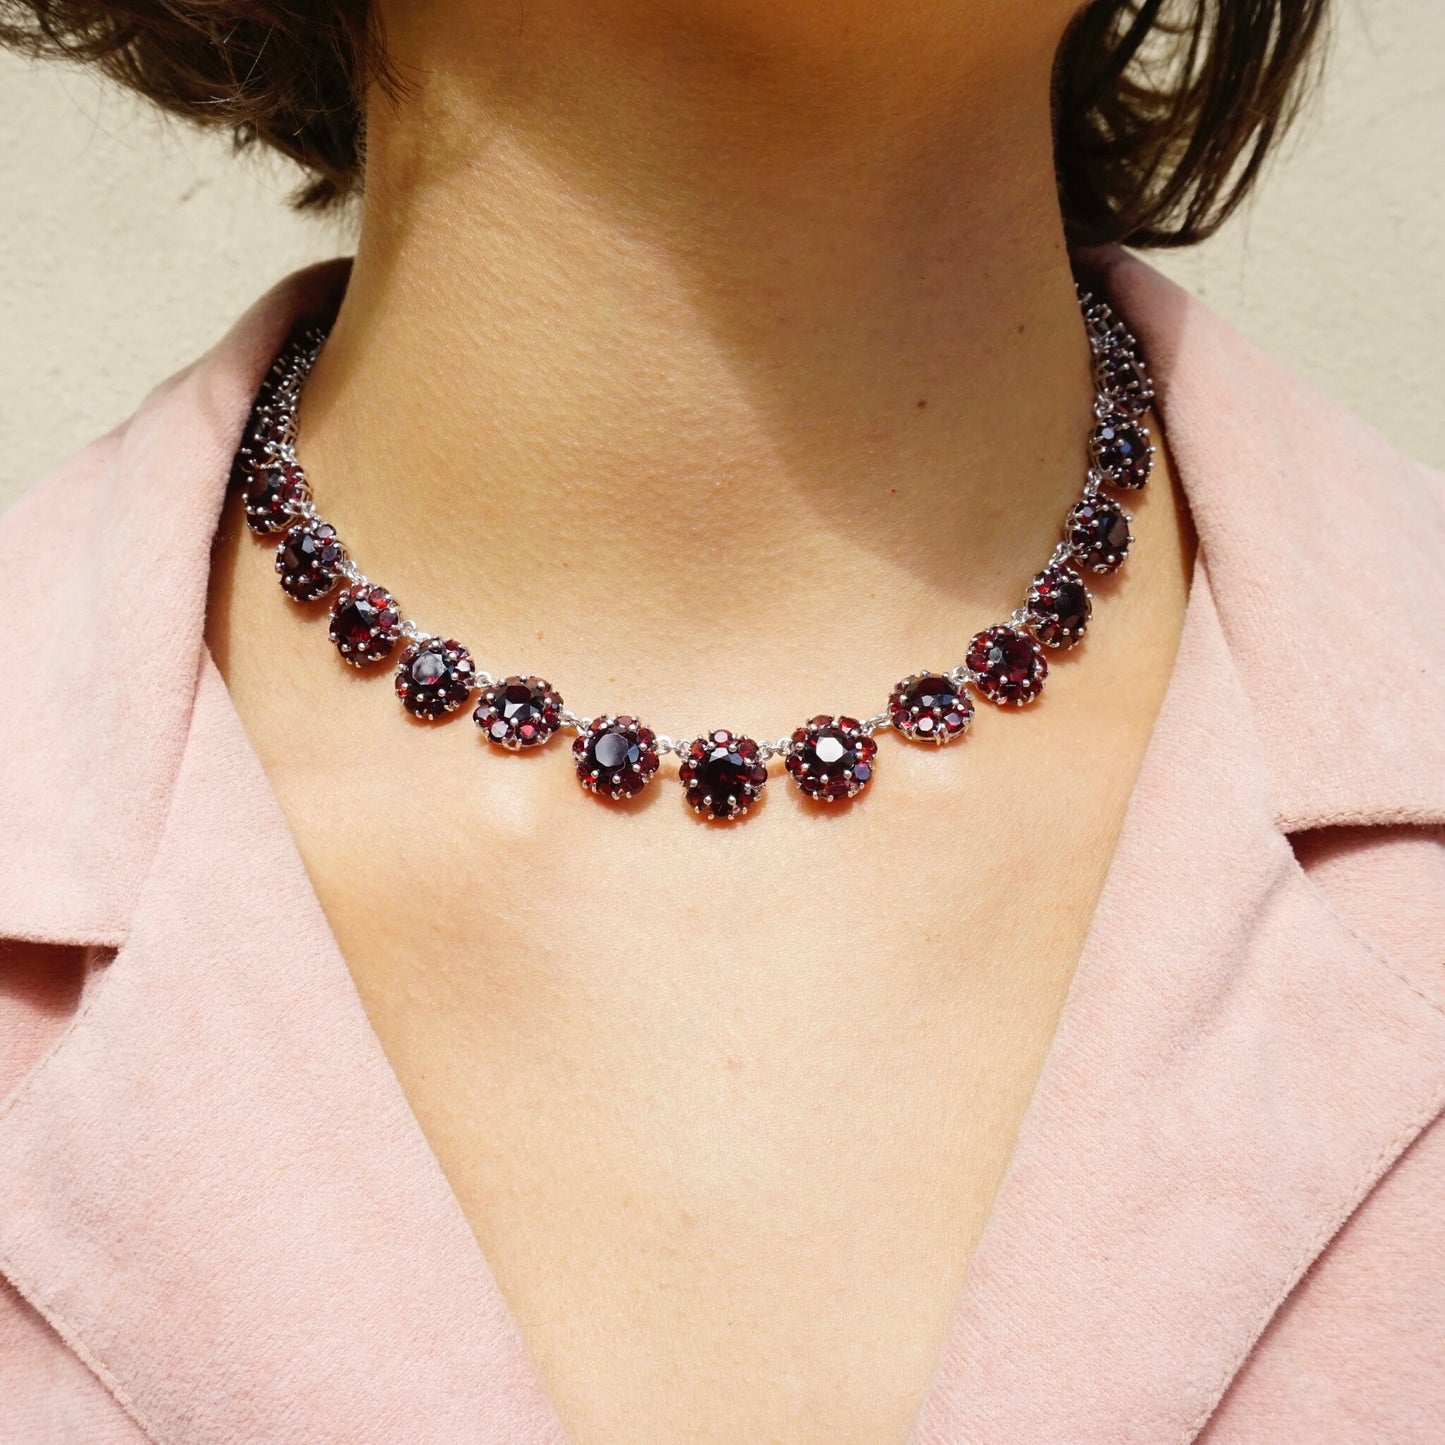 Vintage Sterling Silver Garnet Glass Stone Choker Necklace worn by a woman, featuring beautiful deep red stones set in an ornate silver collar design.